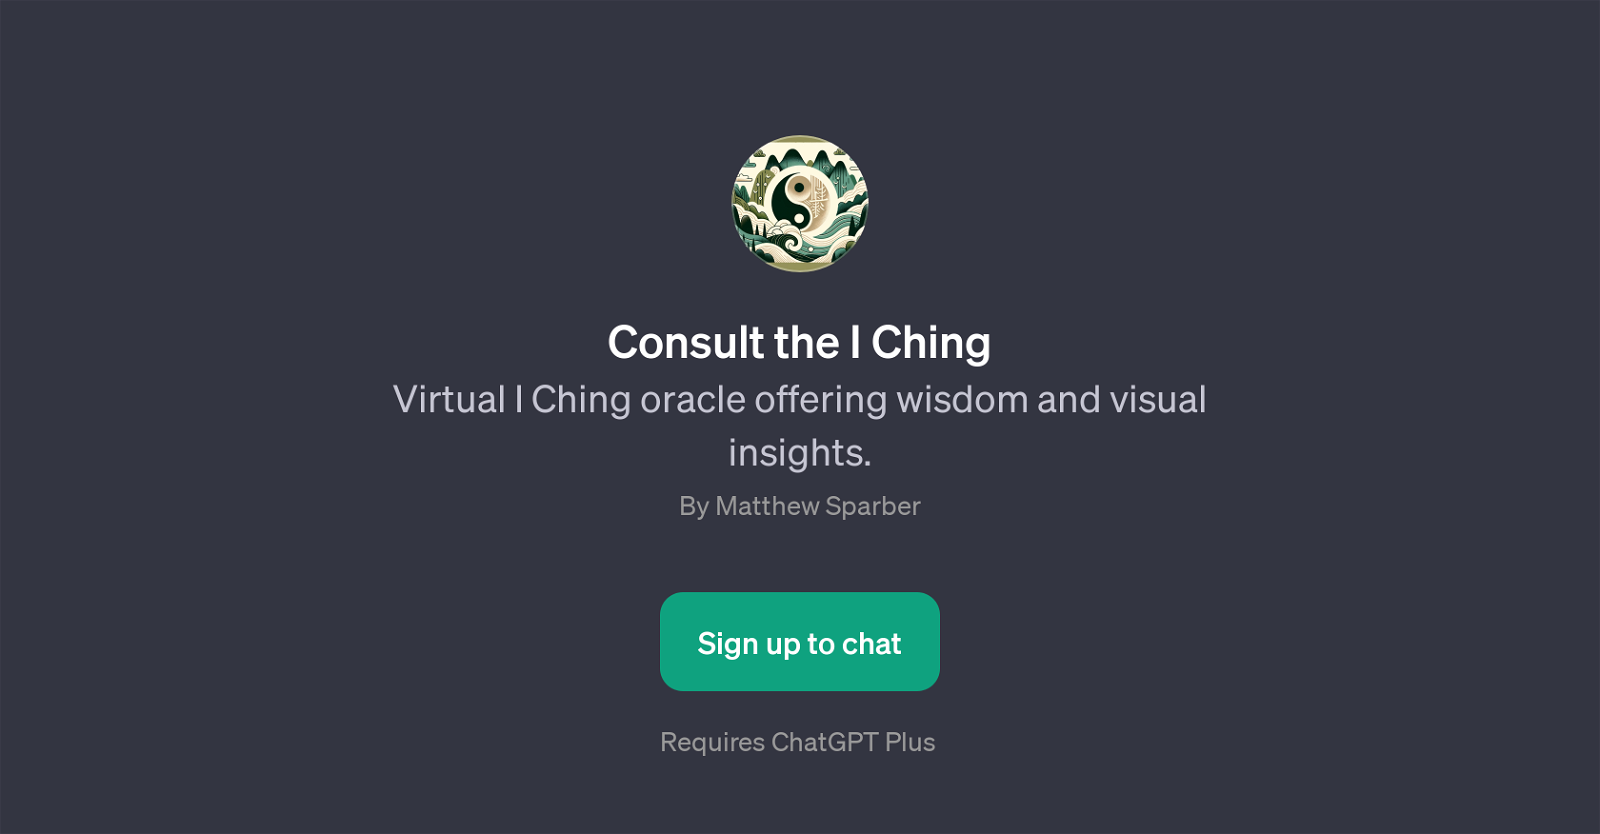 Consult the I Ching website